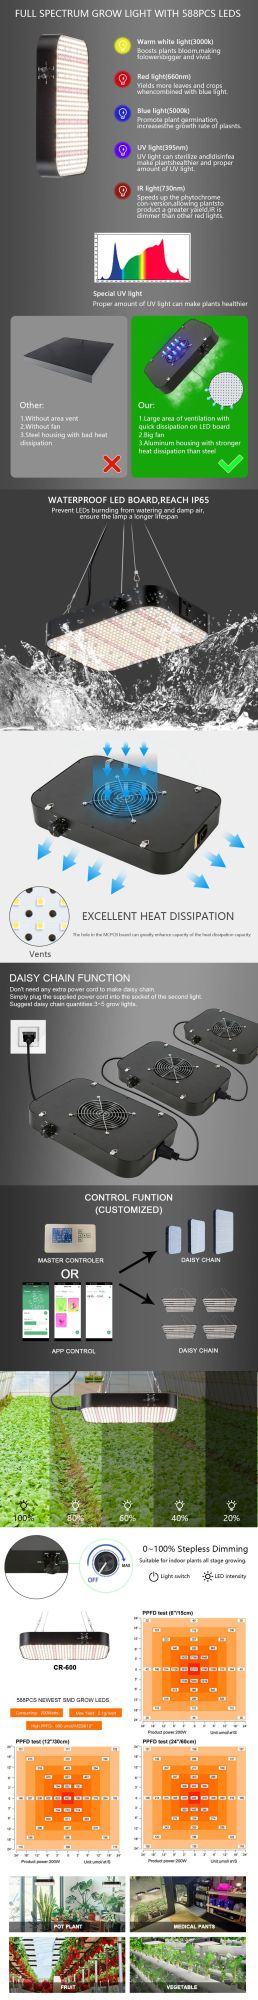 130W LED Grow Lights for Indoor Plants Full Spectrum [Efficient Heat Dissipation] Thermoelectric Separation Plant Light for Greenhou Plants Veg Flower